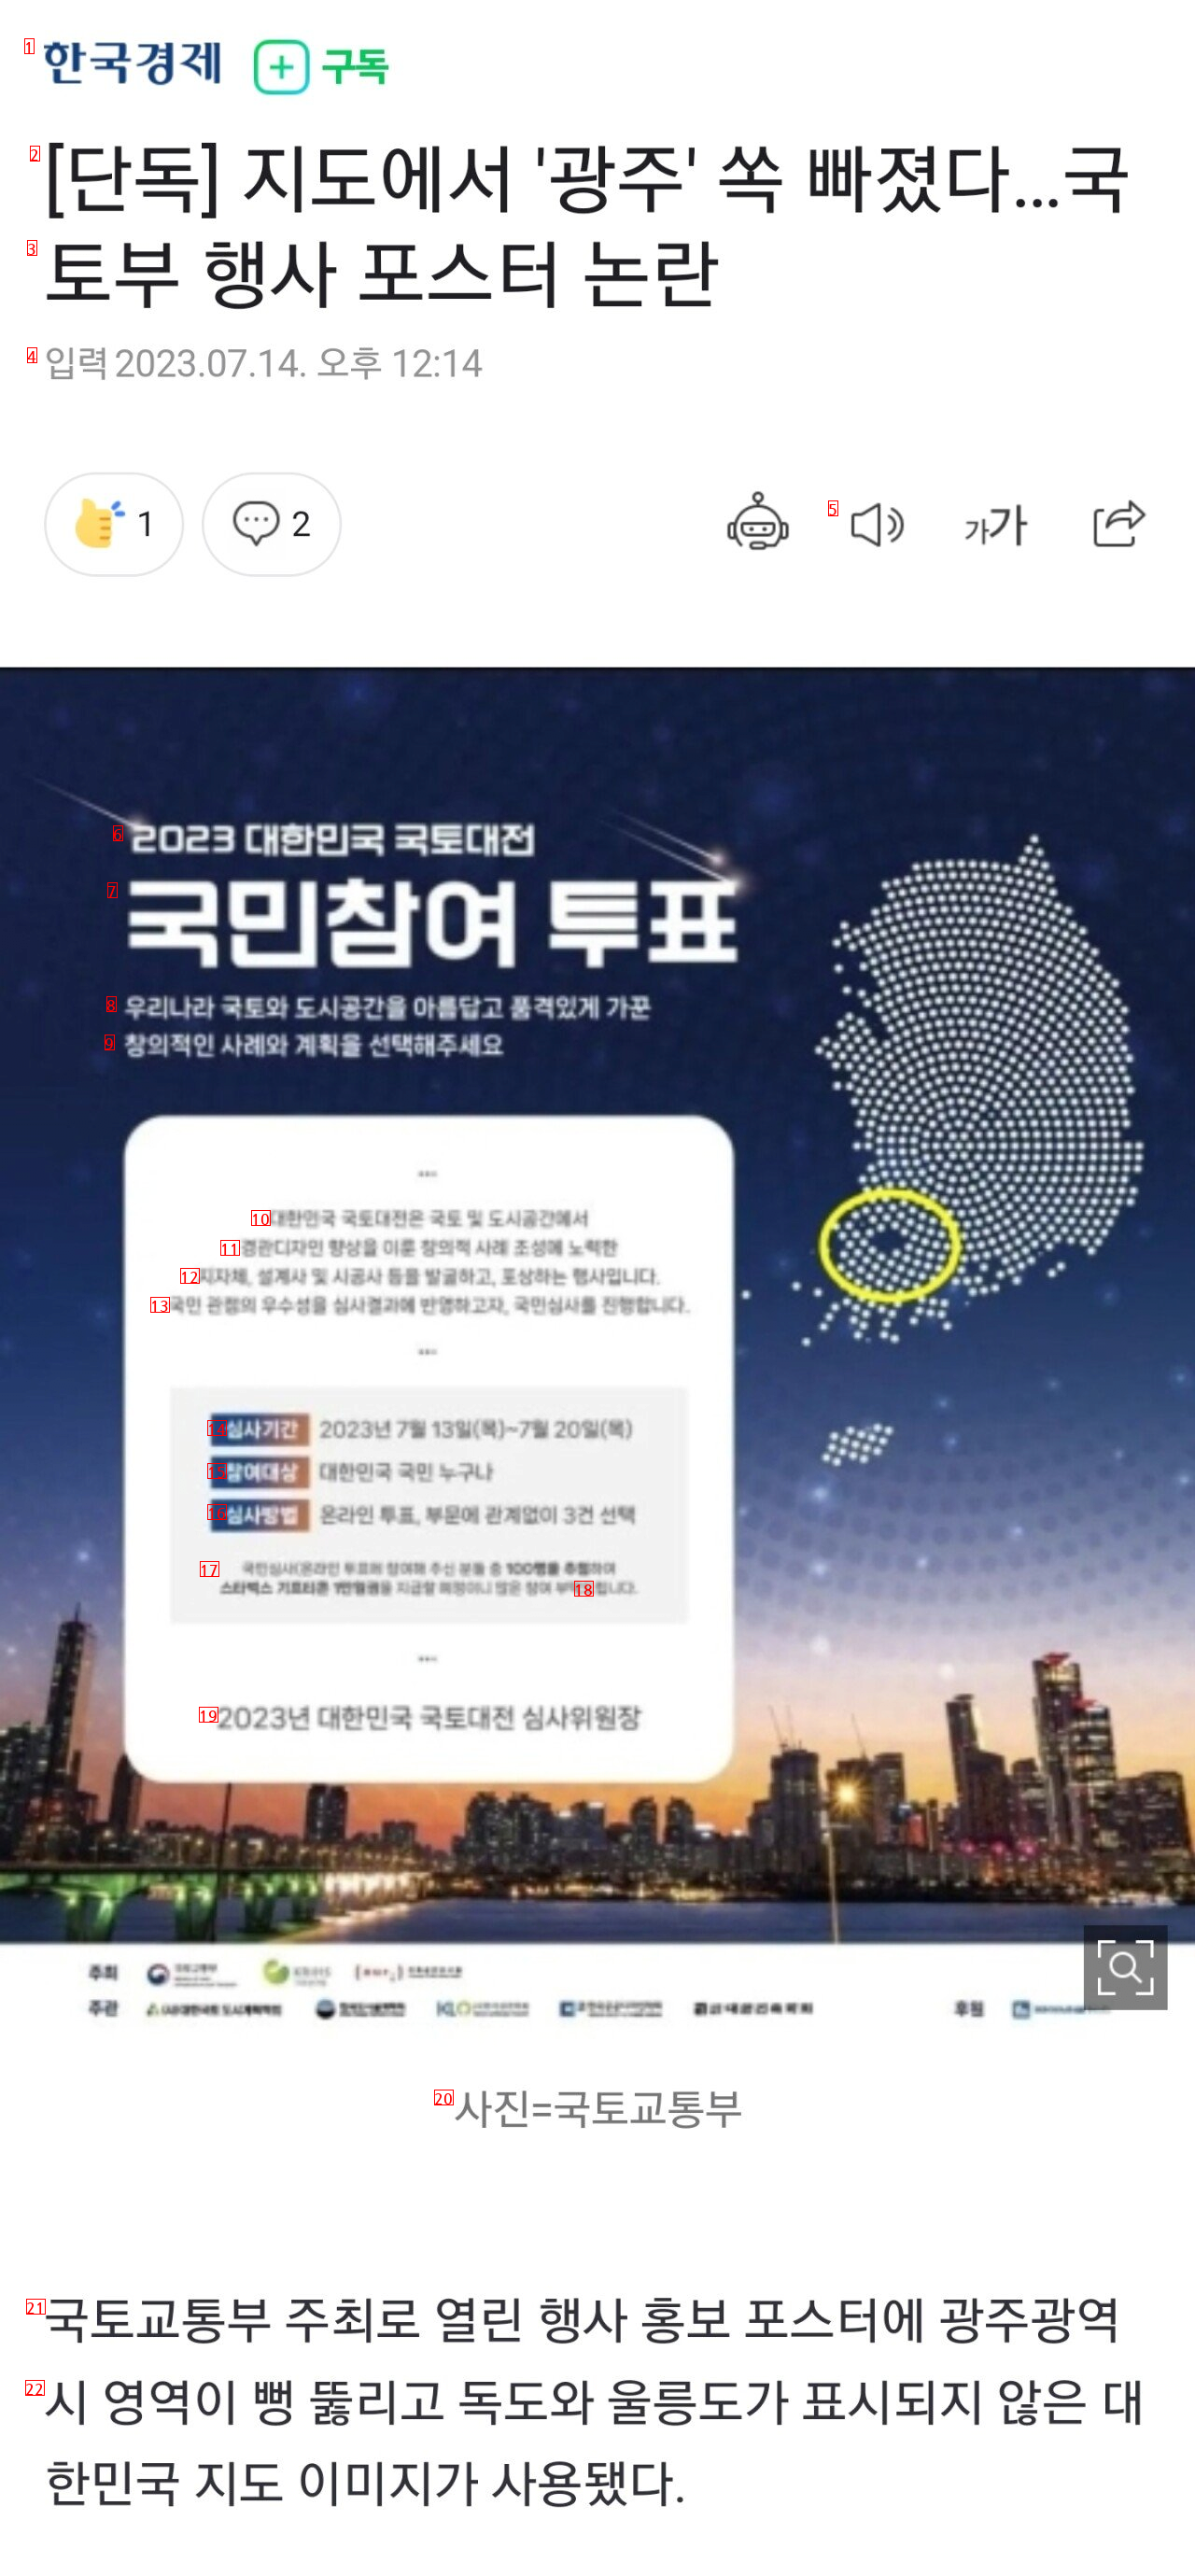 Gwangju fell out of the single map...Ministry of Land, Infrastructure and Transport event poster controversy